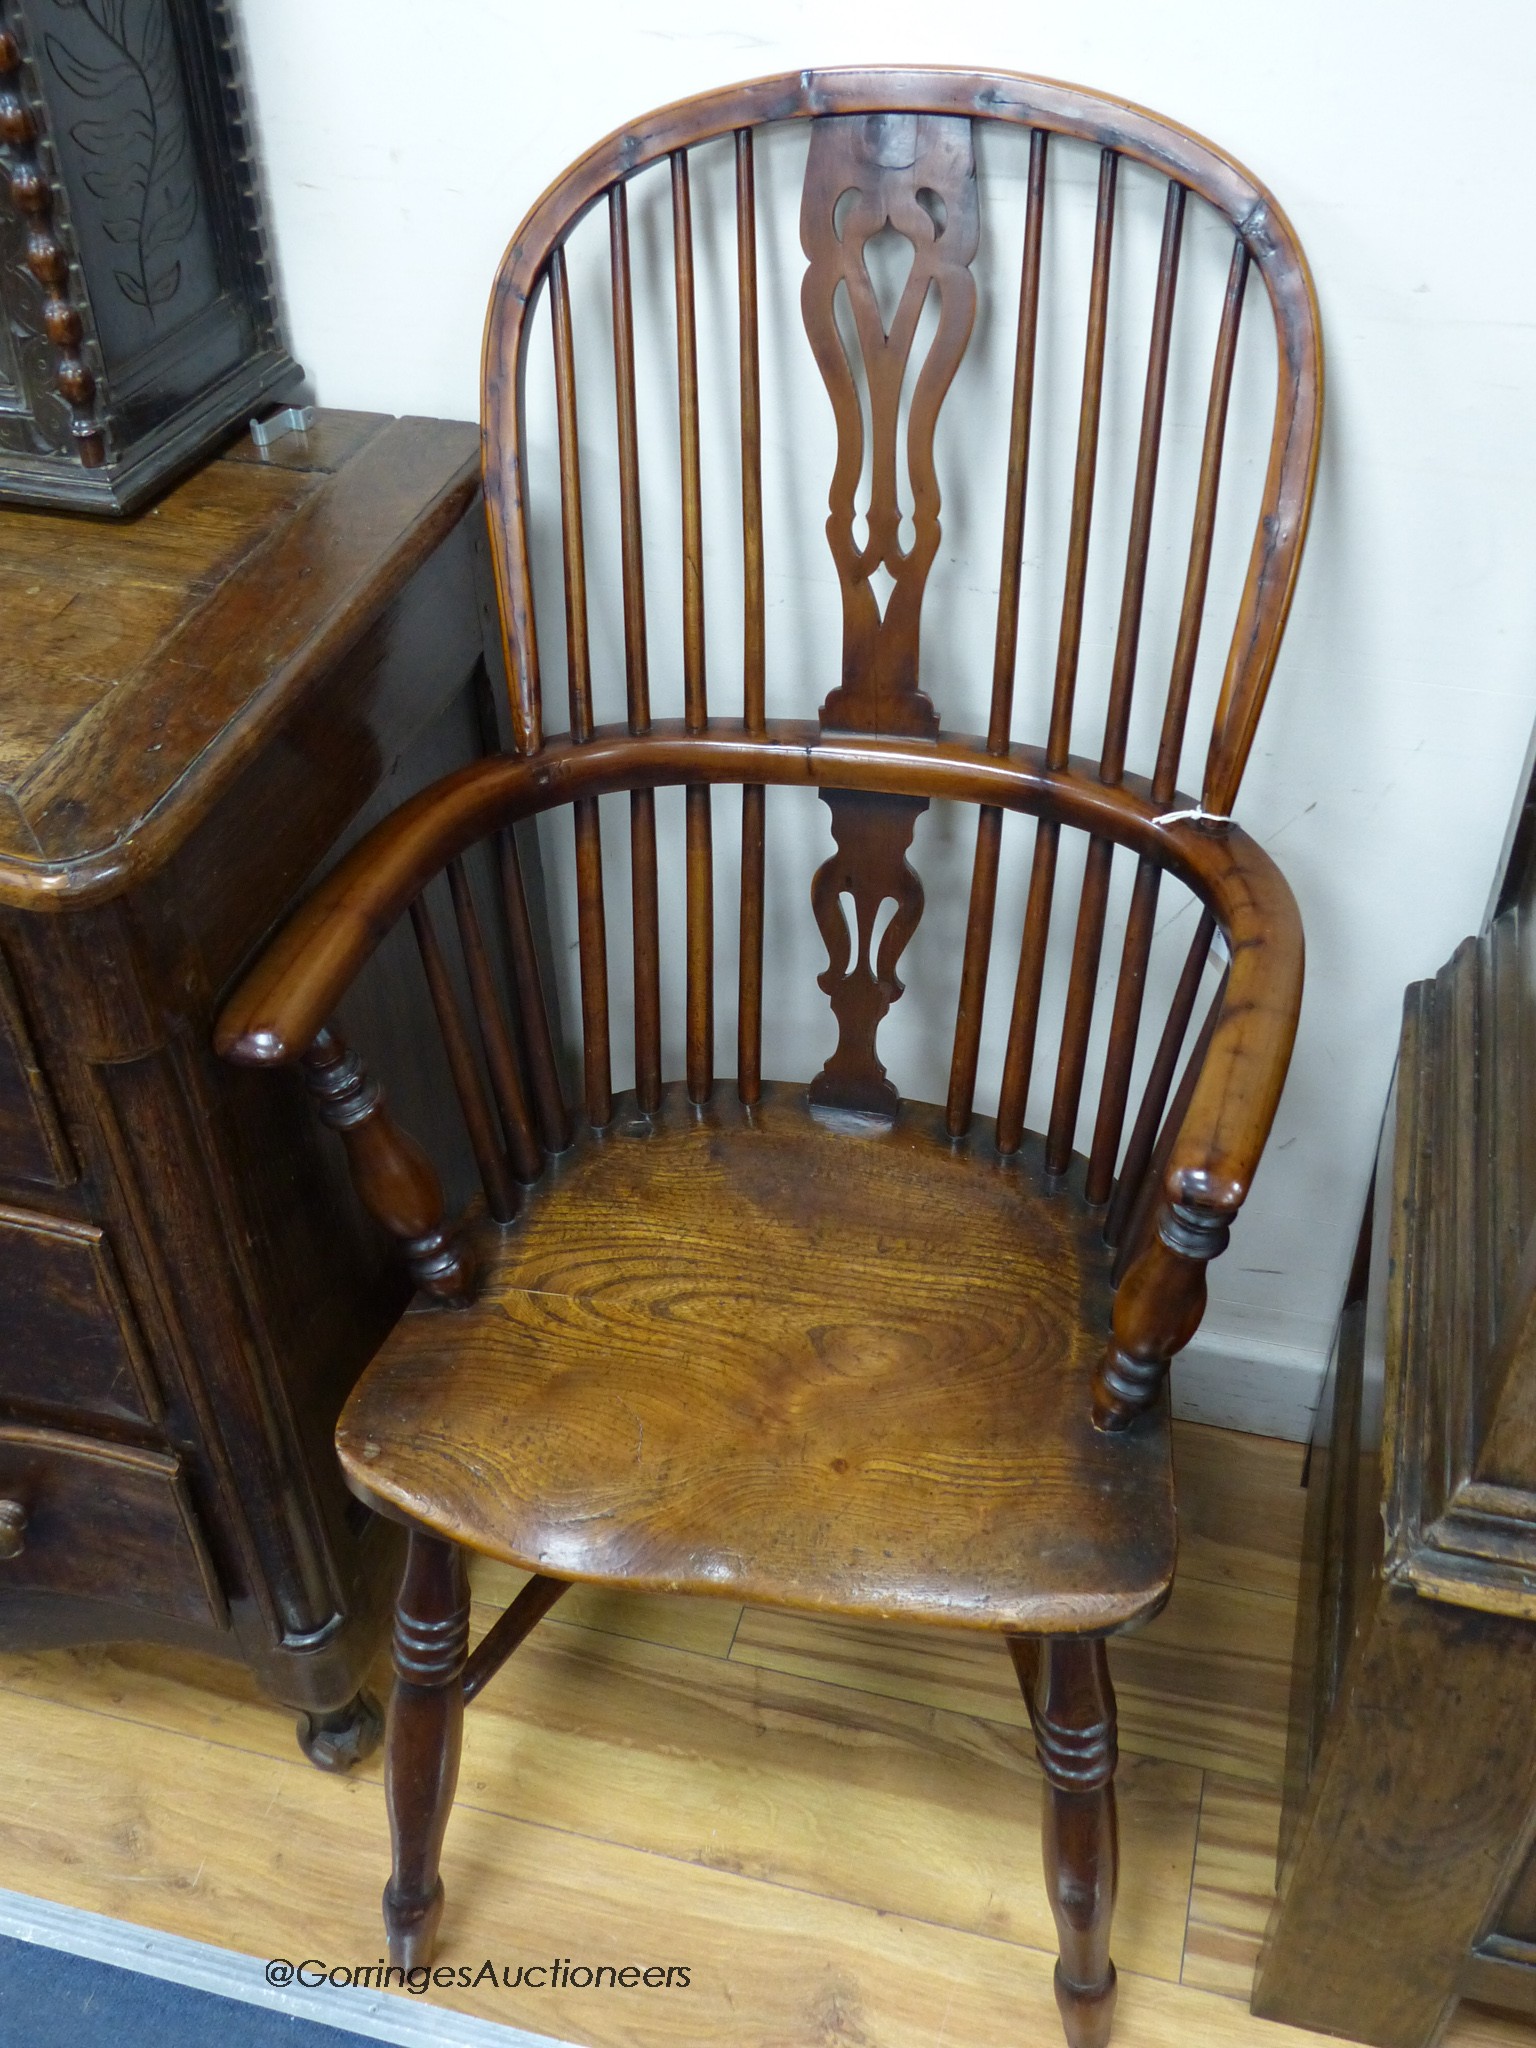 An early 19th century yew and elm Windsor armchair, with crinoline stretcher